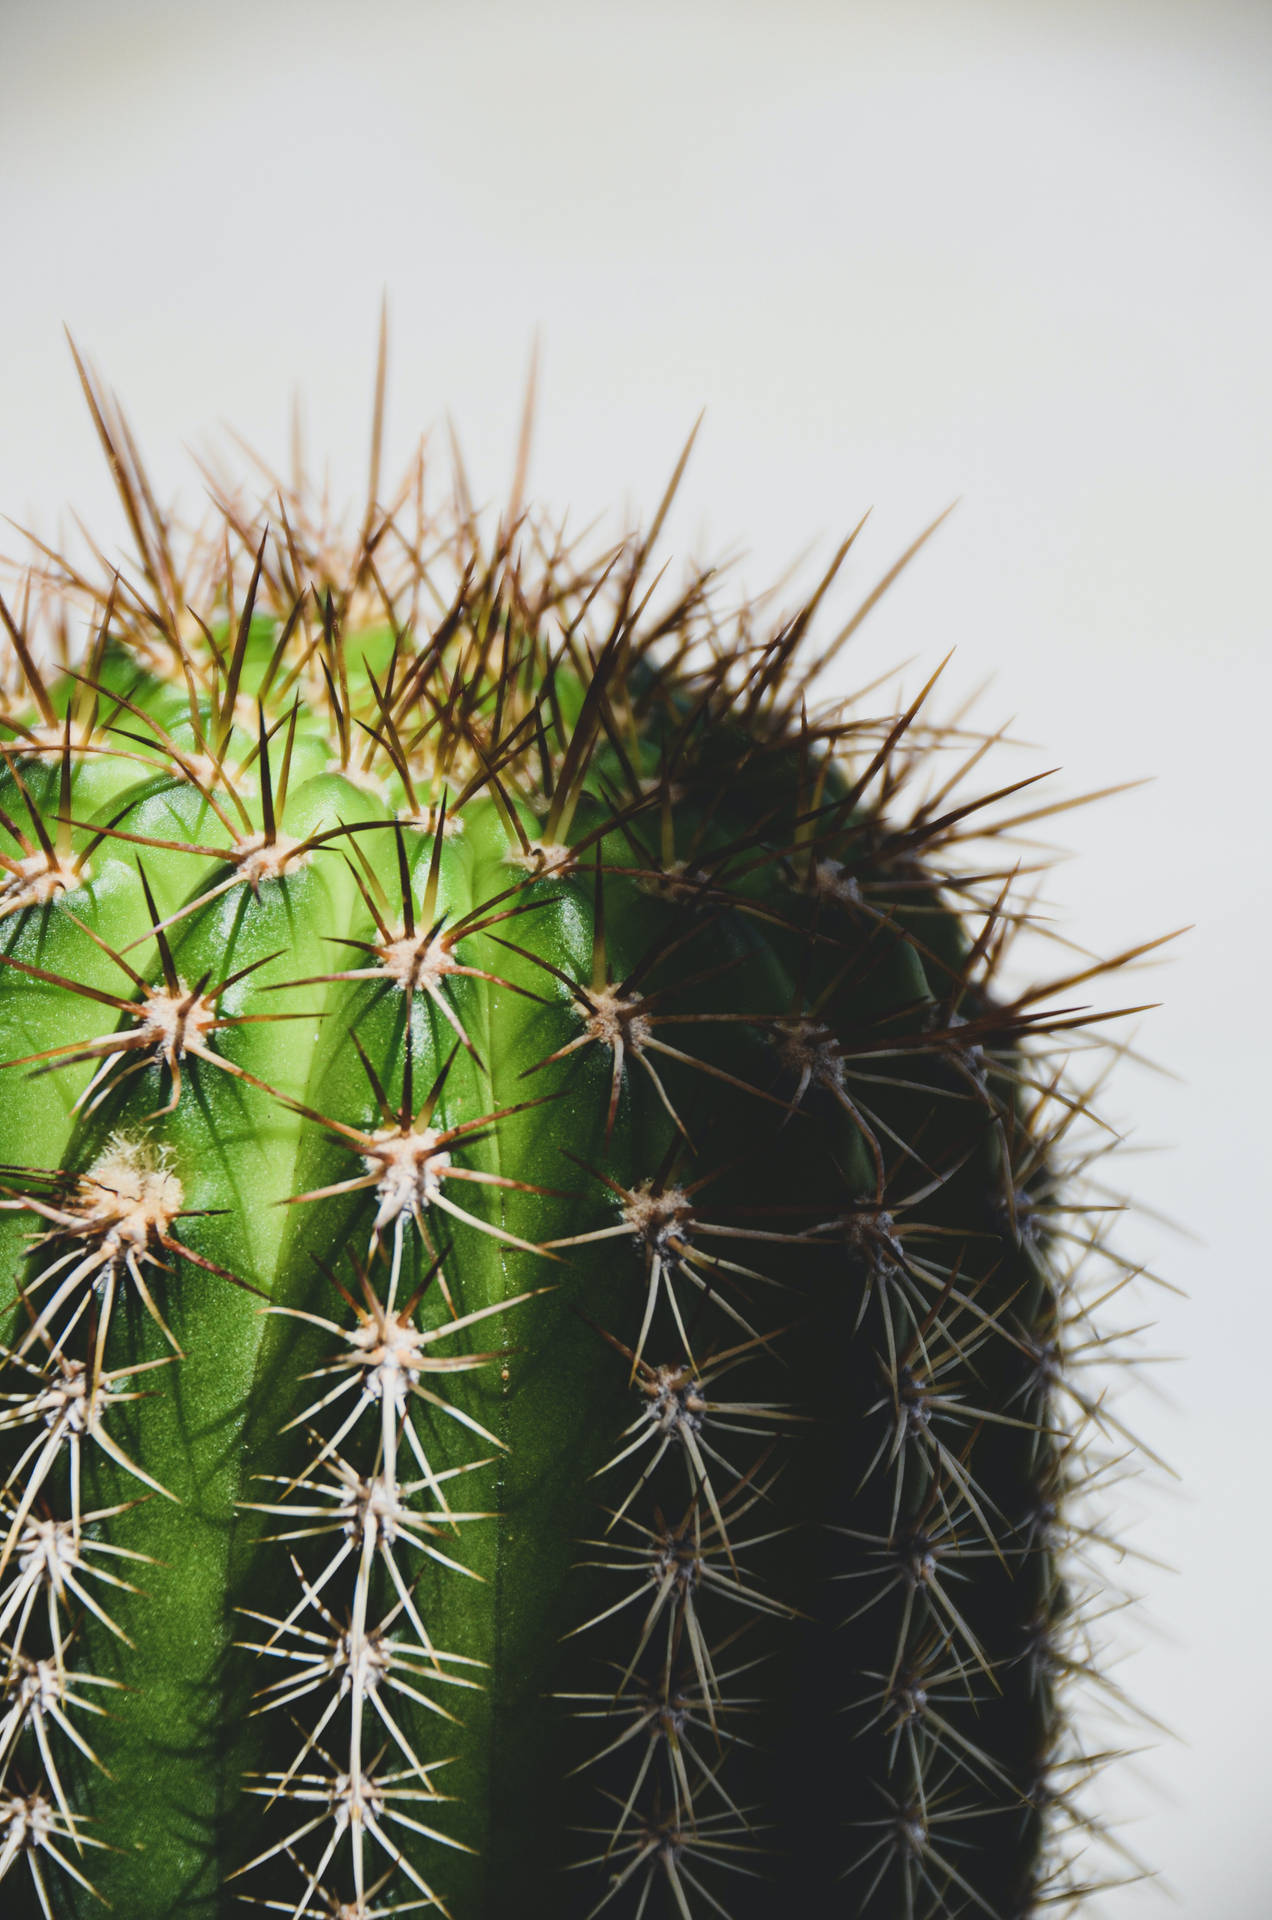 Free Cactus Wallpaper Downloads, [300+] Cactus Wallpapers for FREE |  